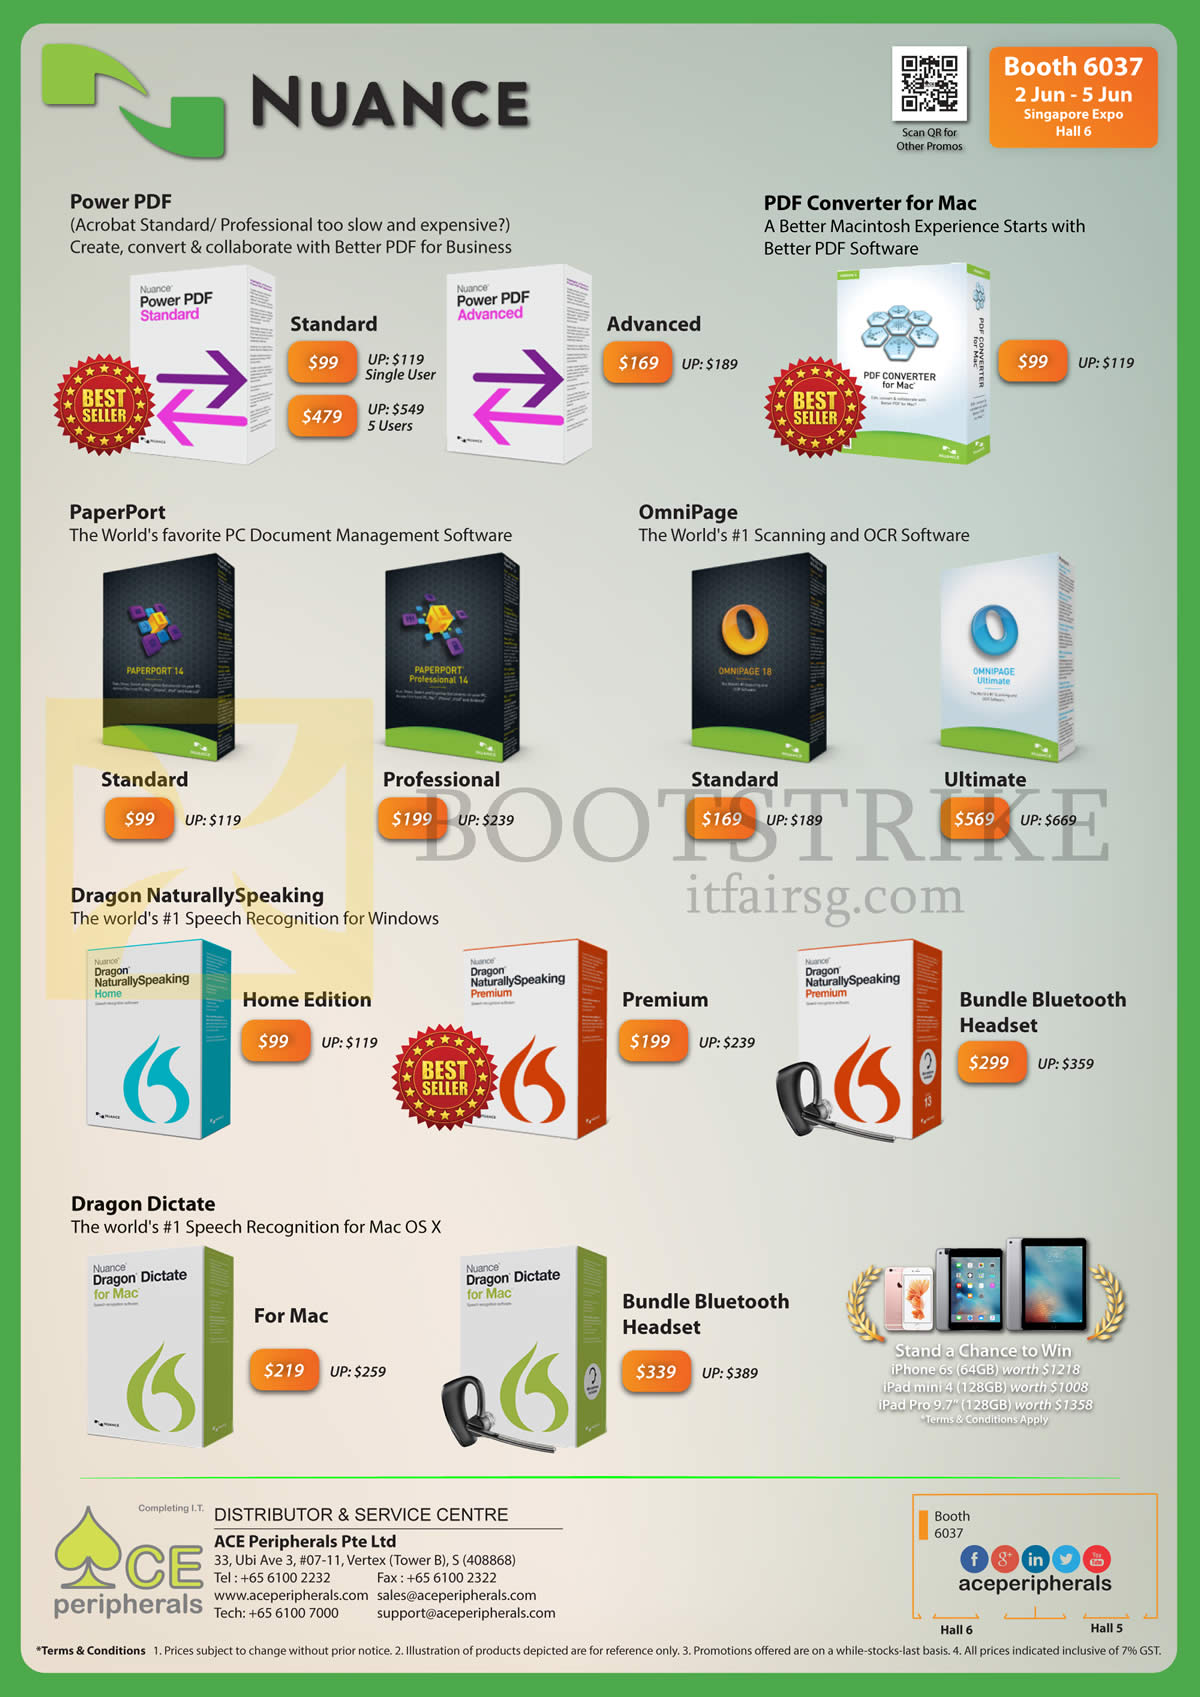 PC SHOW 2016 price list image brochure of ACE Peripherals Nuance Software Series Power PDF, PDF Converter, PaperPort, Omnipage, Dragon Dictate, Naturally Speaking